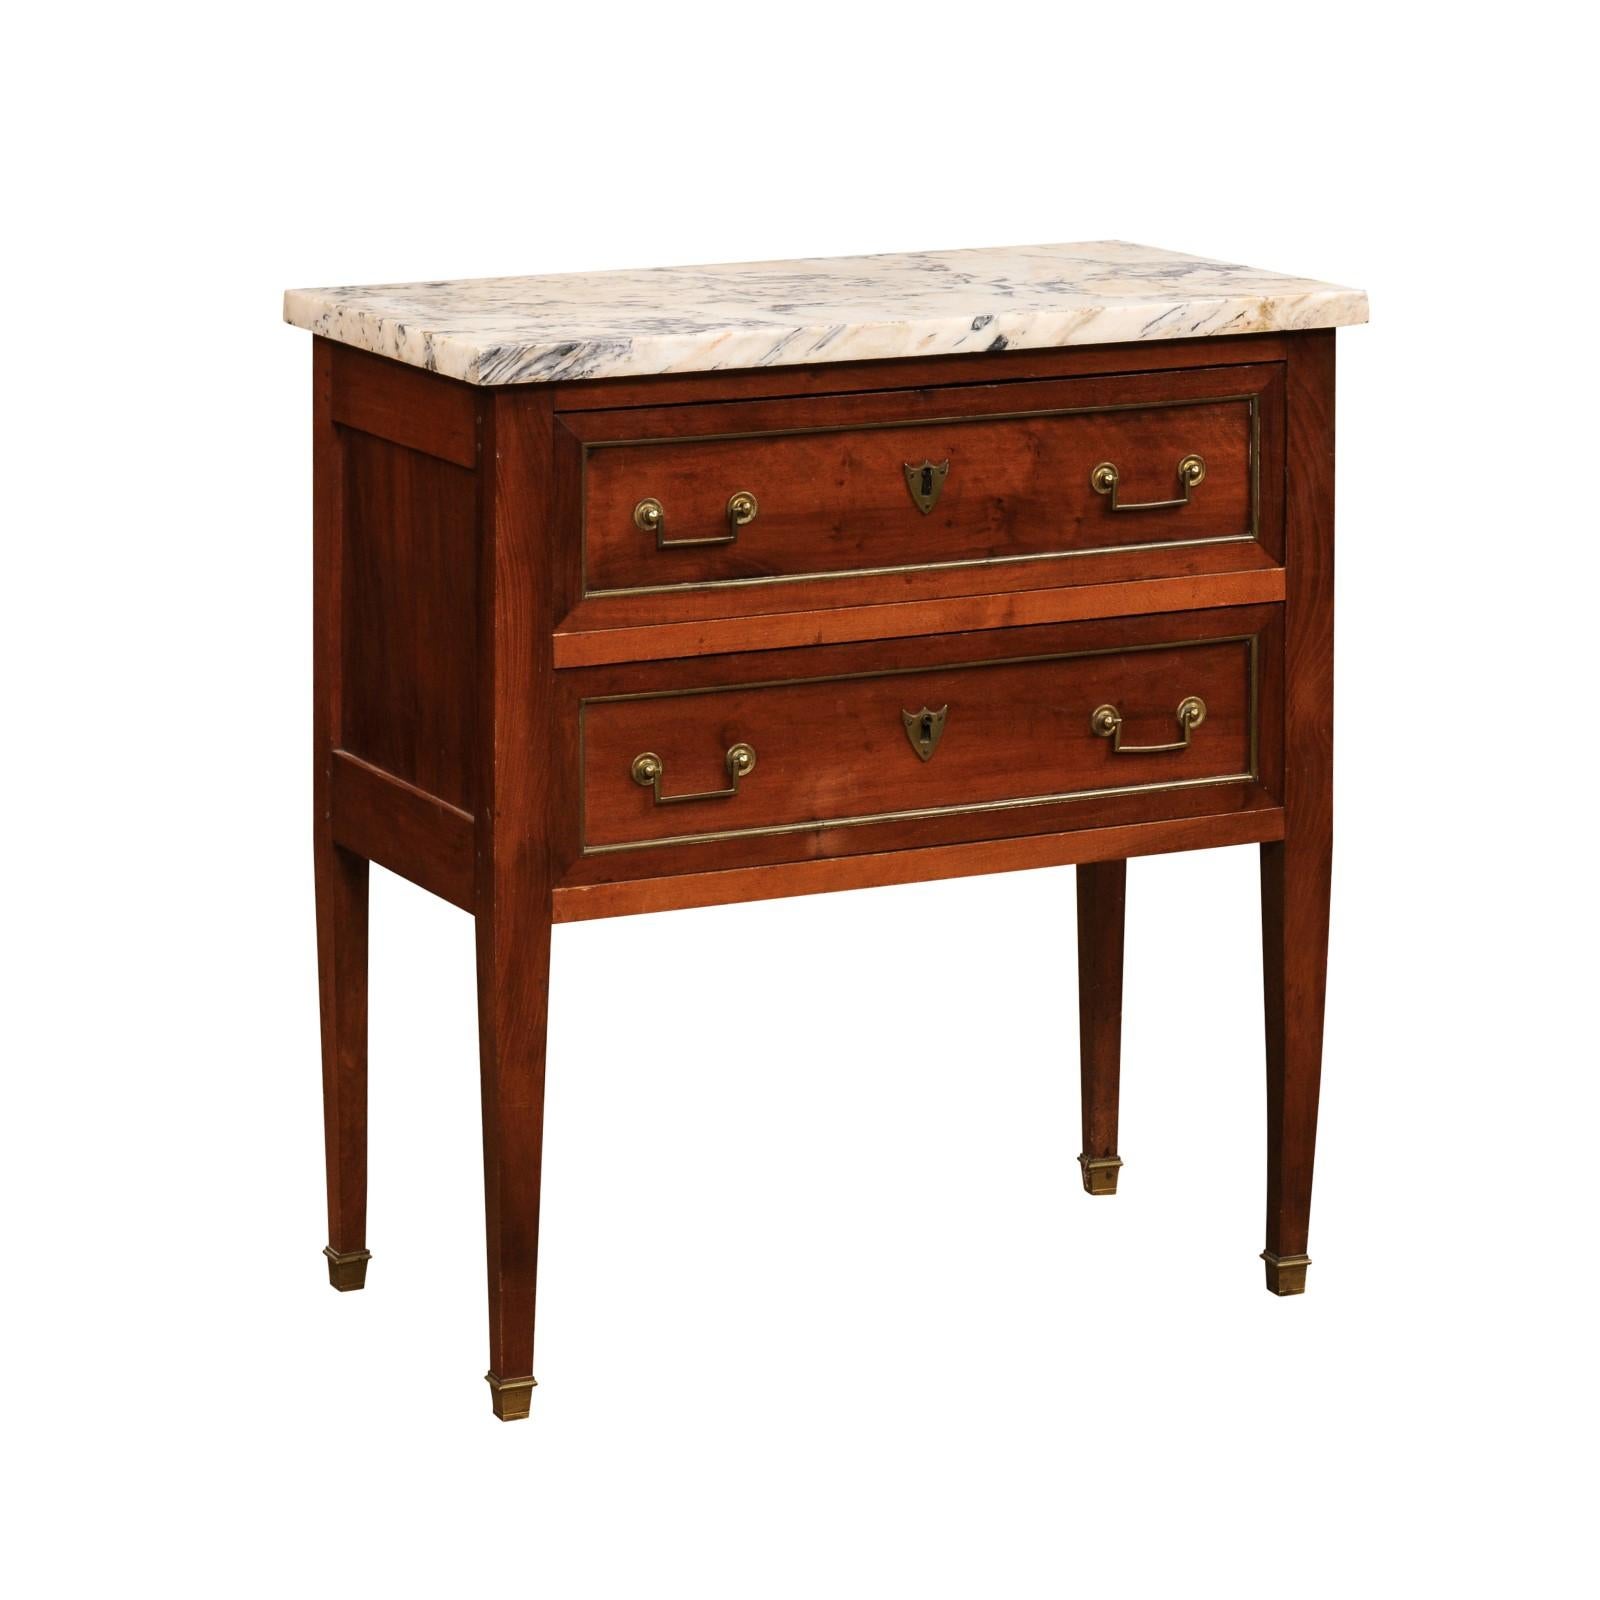 A French Louis XVI style walnut commode from the 19th century, with marble top, two drawers, tapered legs and brass hardware. Created in France during the 19th century, this walnut commode features a rectangular white and cream variegated marble top